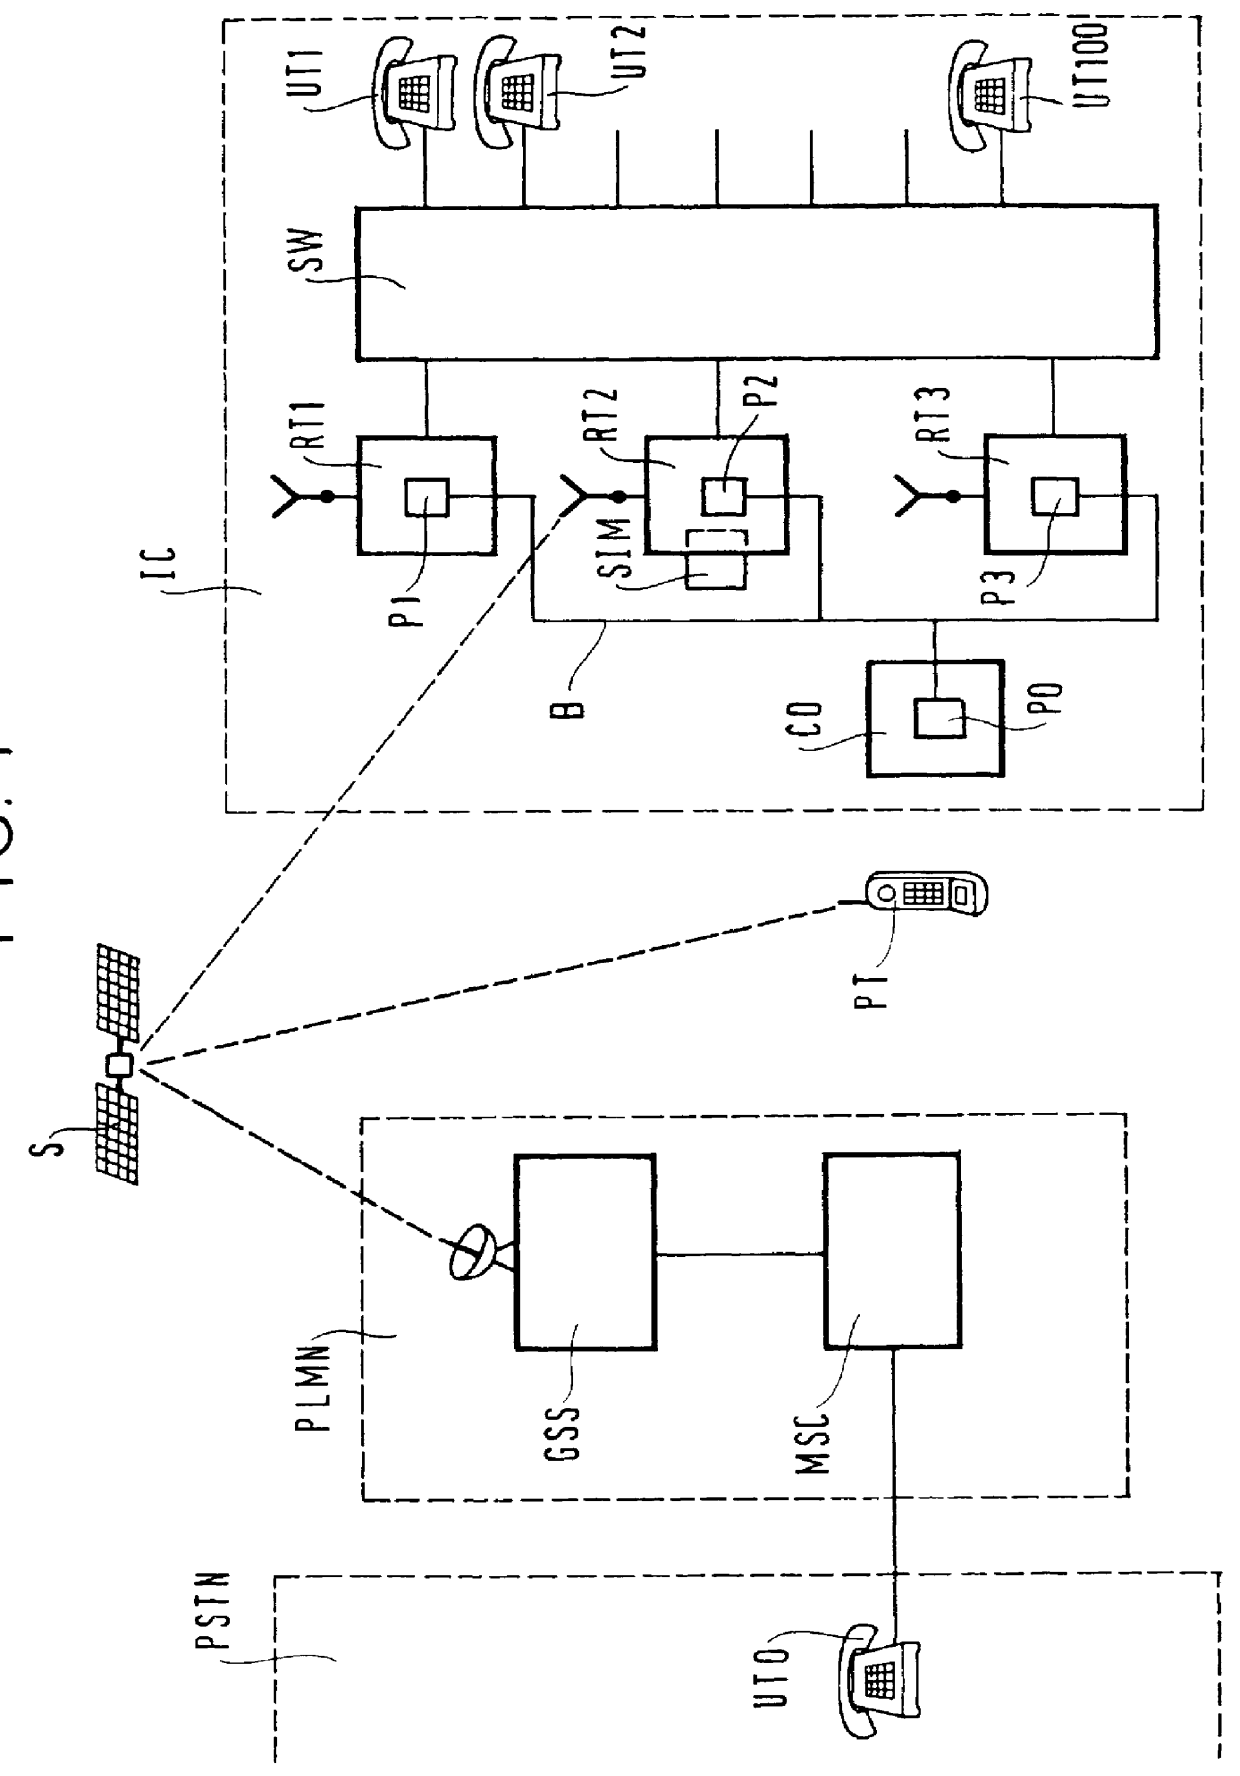 Device for connecting a telephone switch to a fixed telephone network via a plurality of fixed radiotelephone terminals of a radiotelephone network